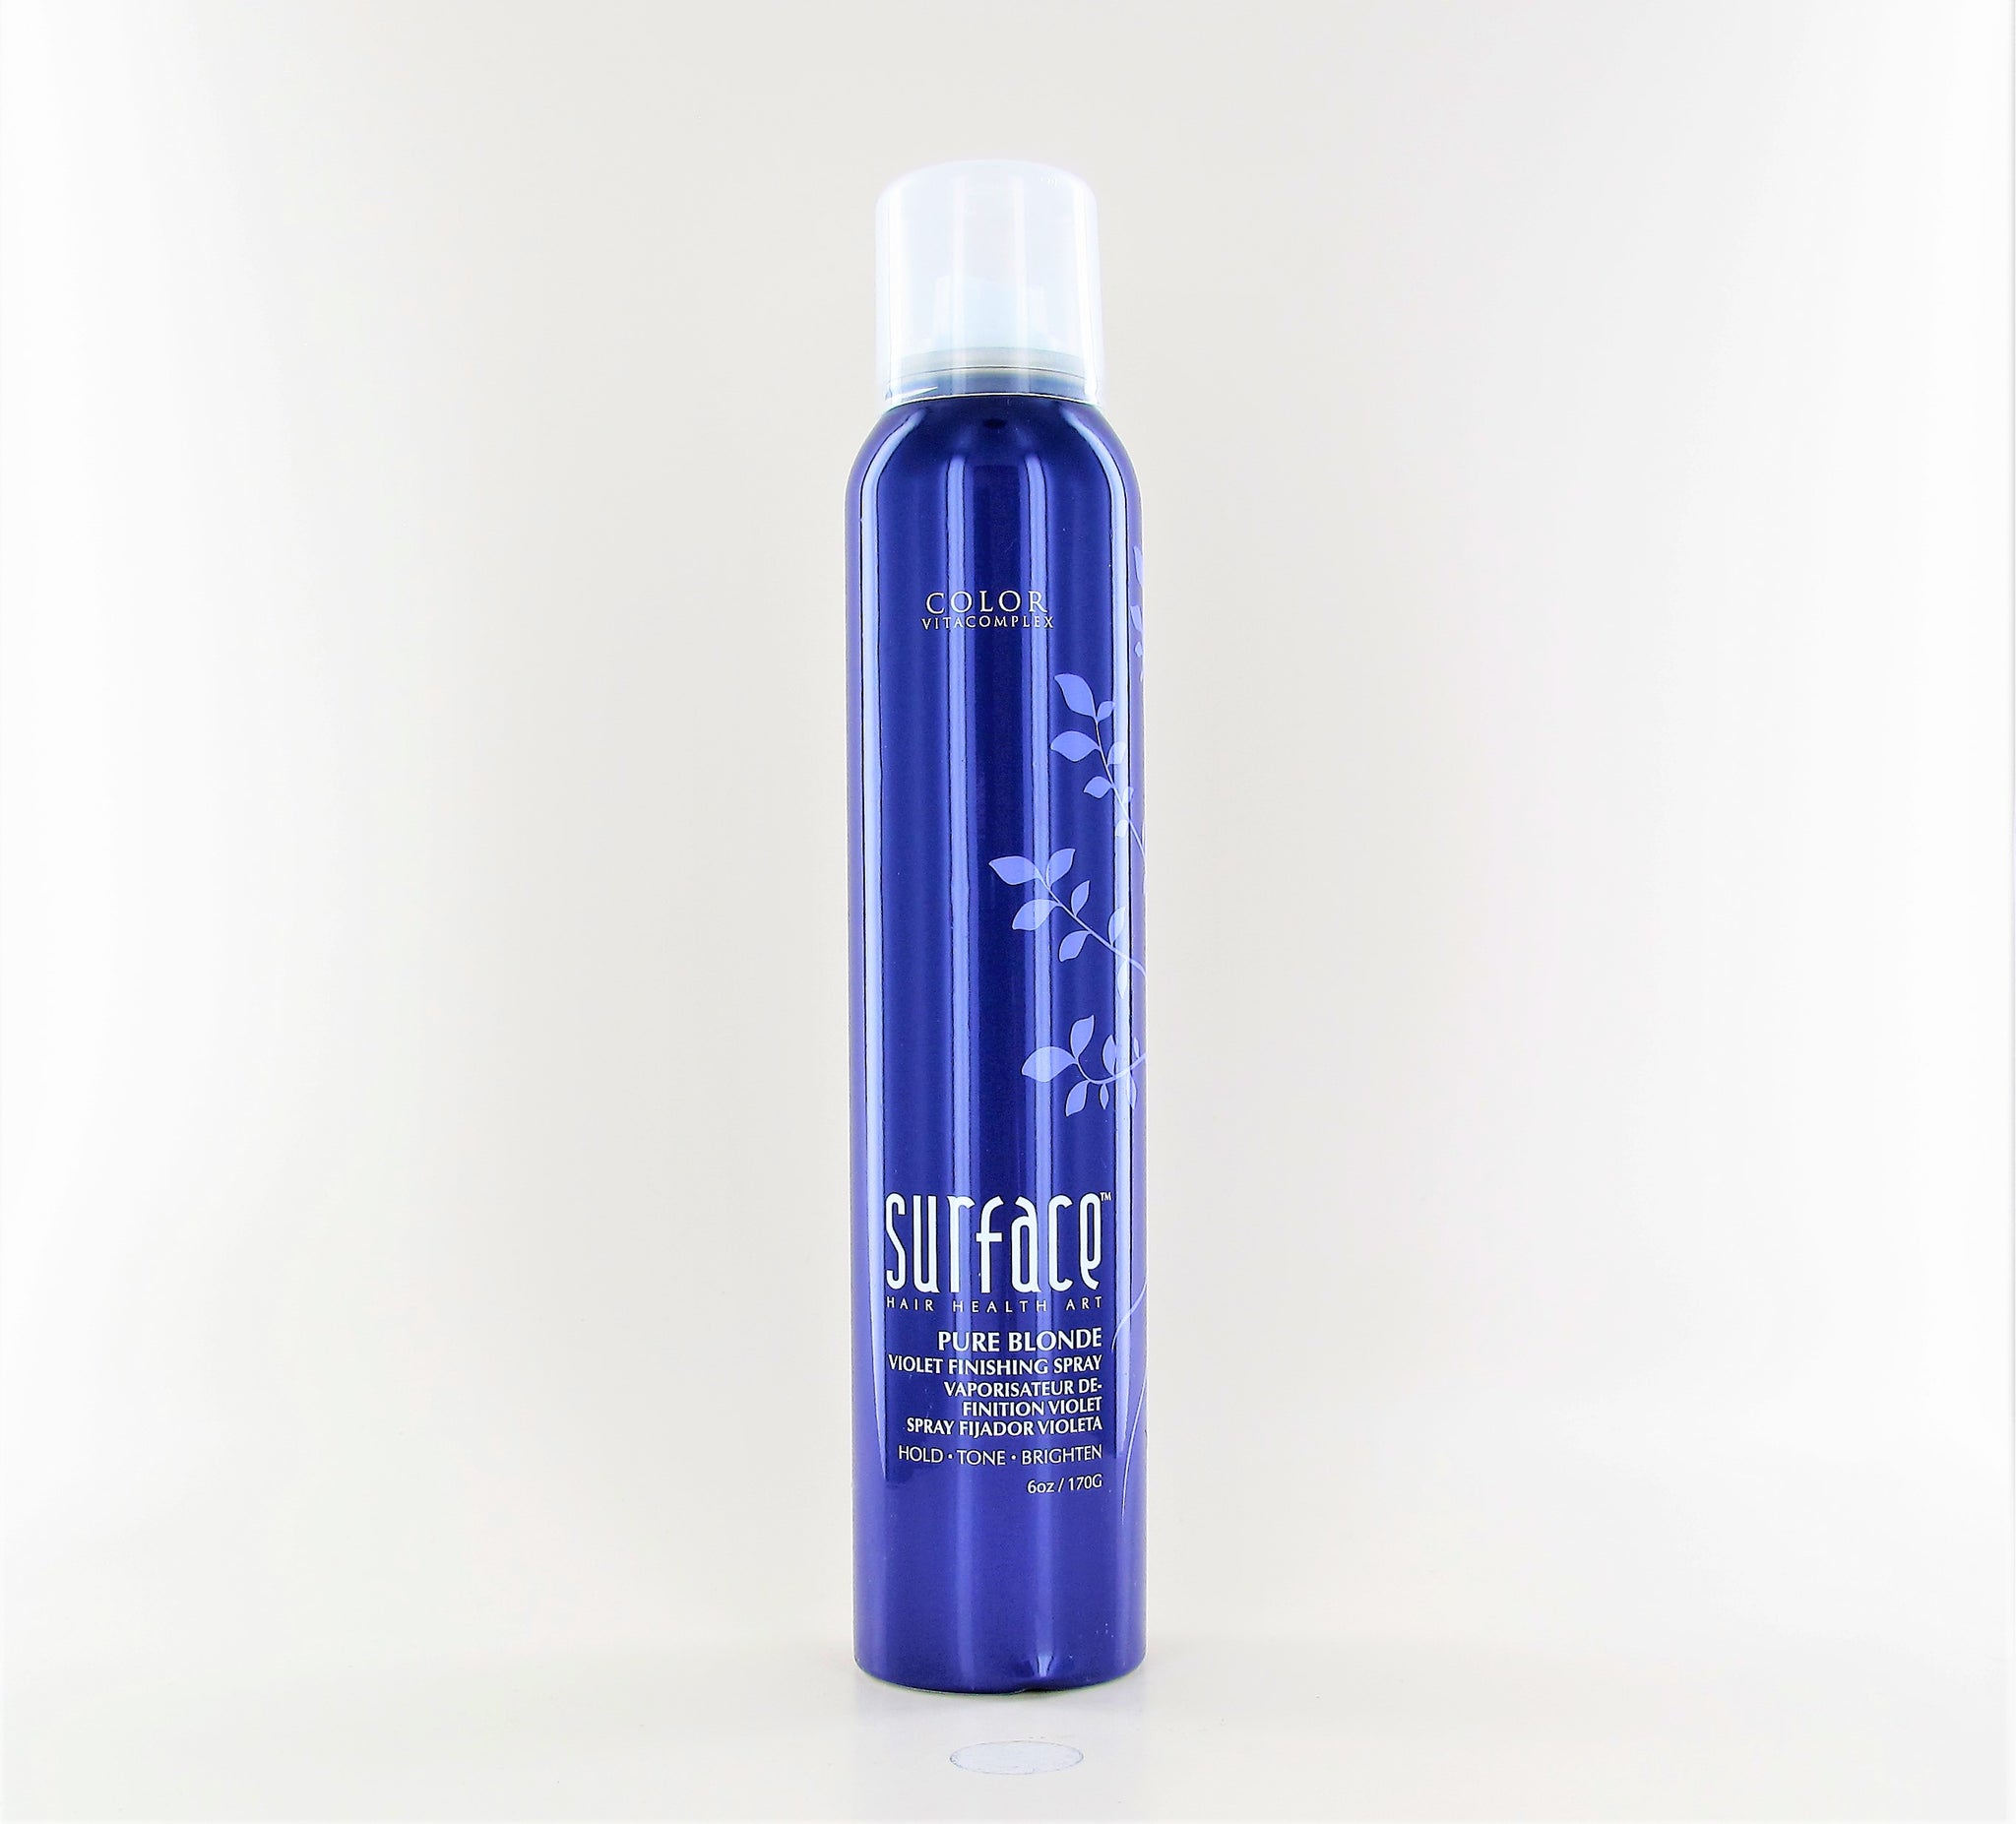 SURFACE Pure Blonde Violet Finishing Spray 6 oz